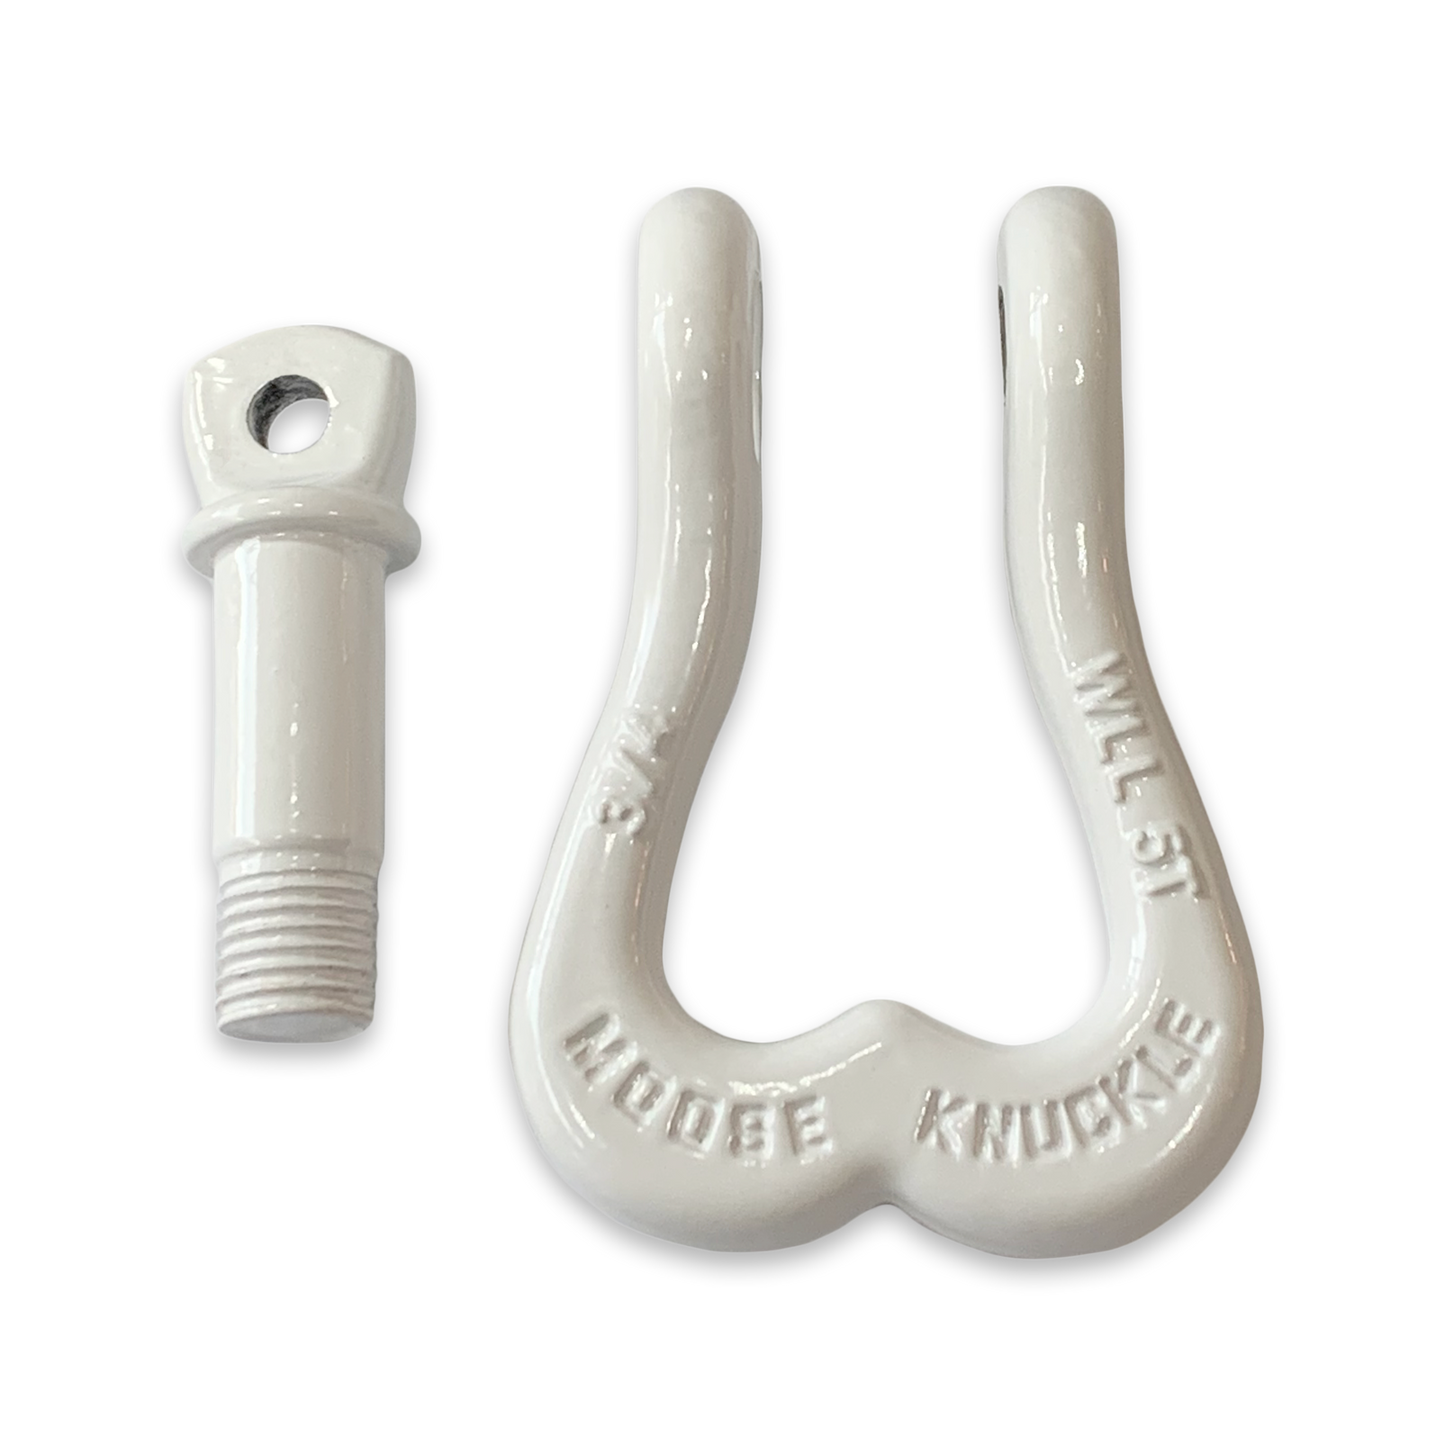 Moose Knuckle XL Pure White Heavy Duty Extra Strong Patent Pending 3/4" Shackle for Off-Road Vehicle Recovery to Replace Bull Balls